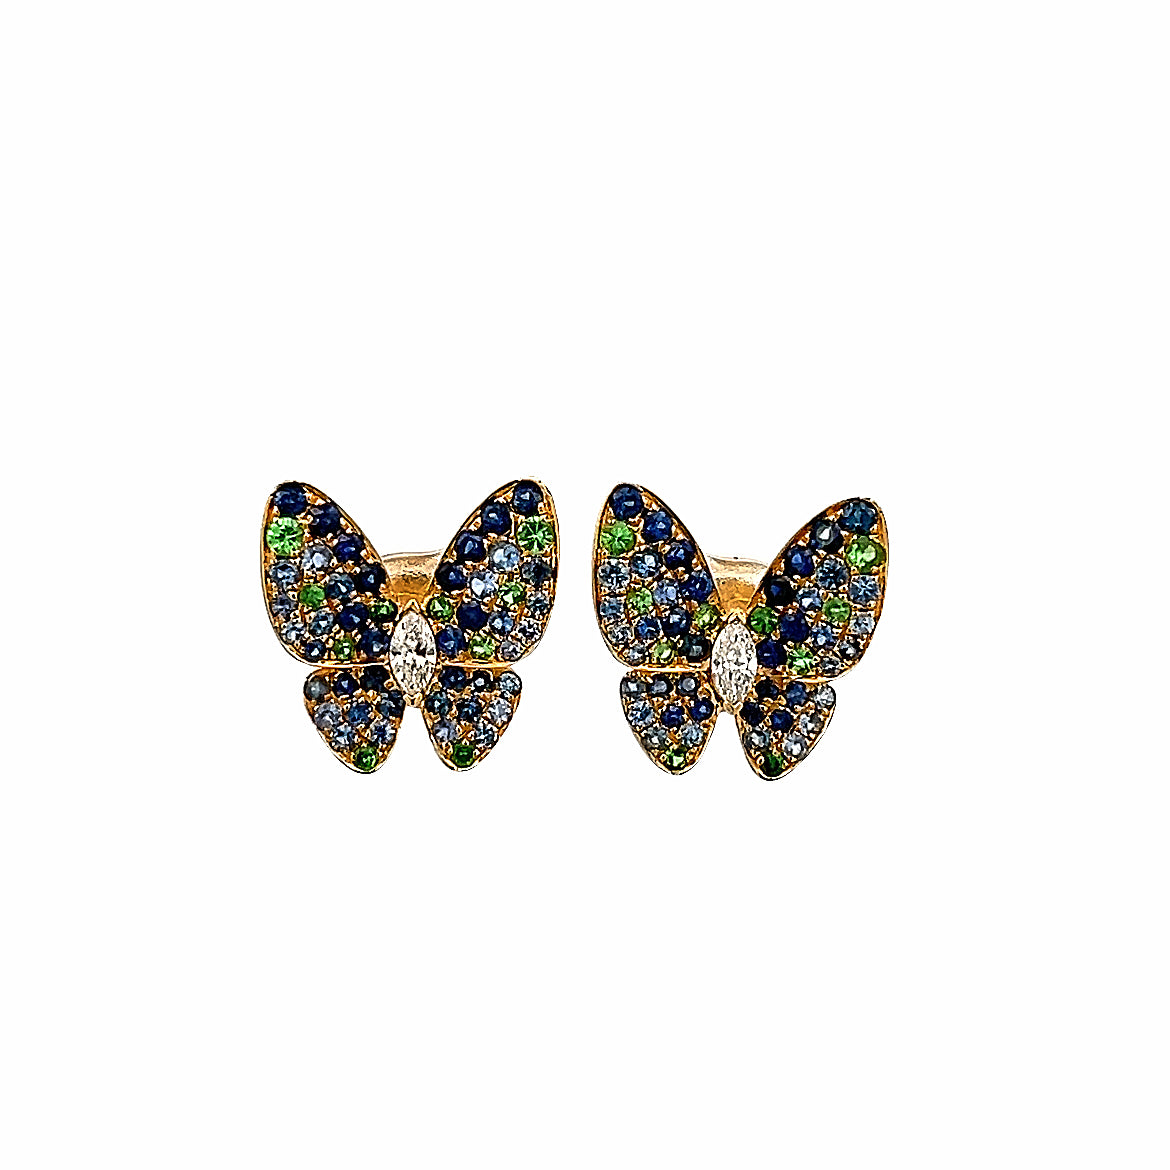 18K GOLD BUTTERFLY EARRINGS WITH GREEN GARNET AND BLUE SAPPHIRE